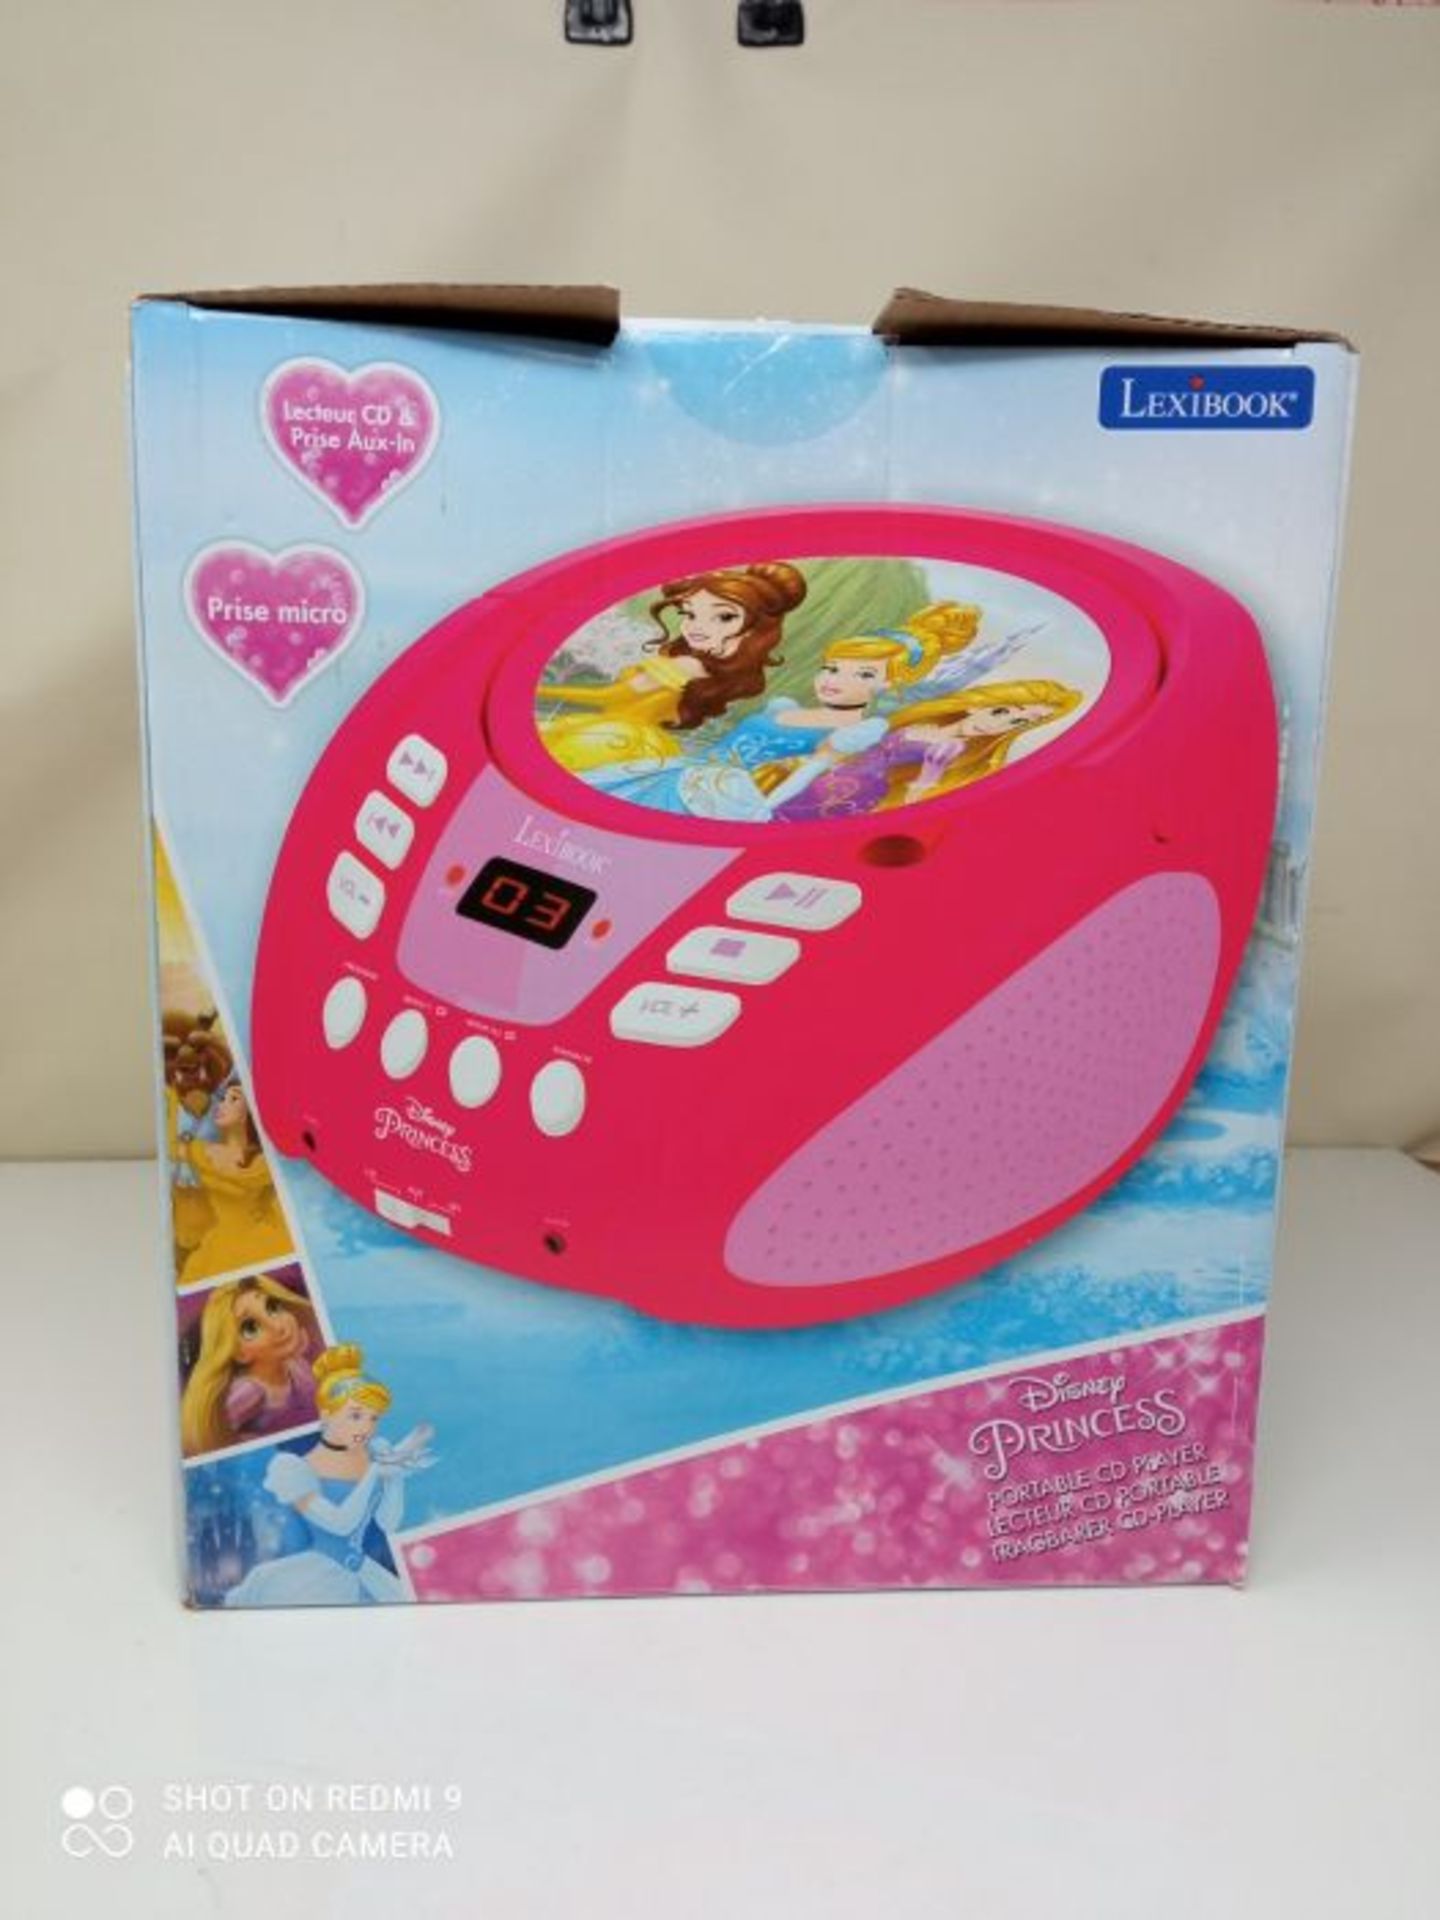 Lexibook Disney Princess CD player, aux-in jack, AC or battery-operated, Pink/White, R - Image 2 of 3